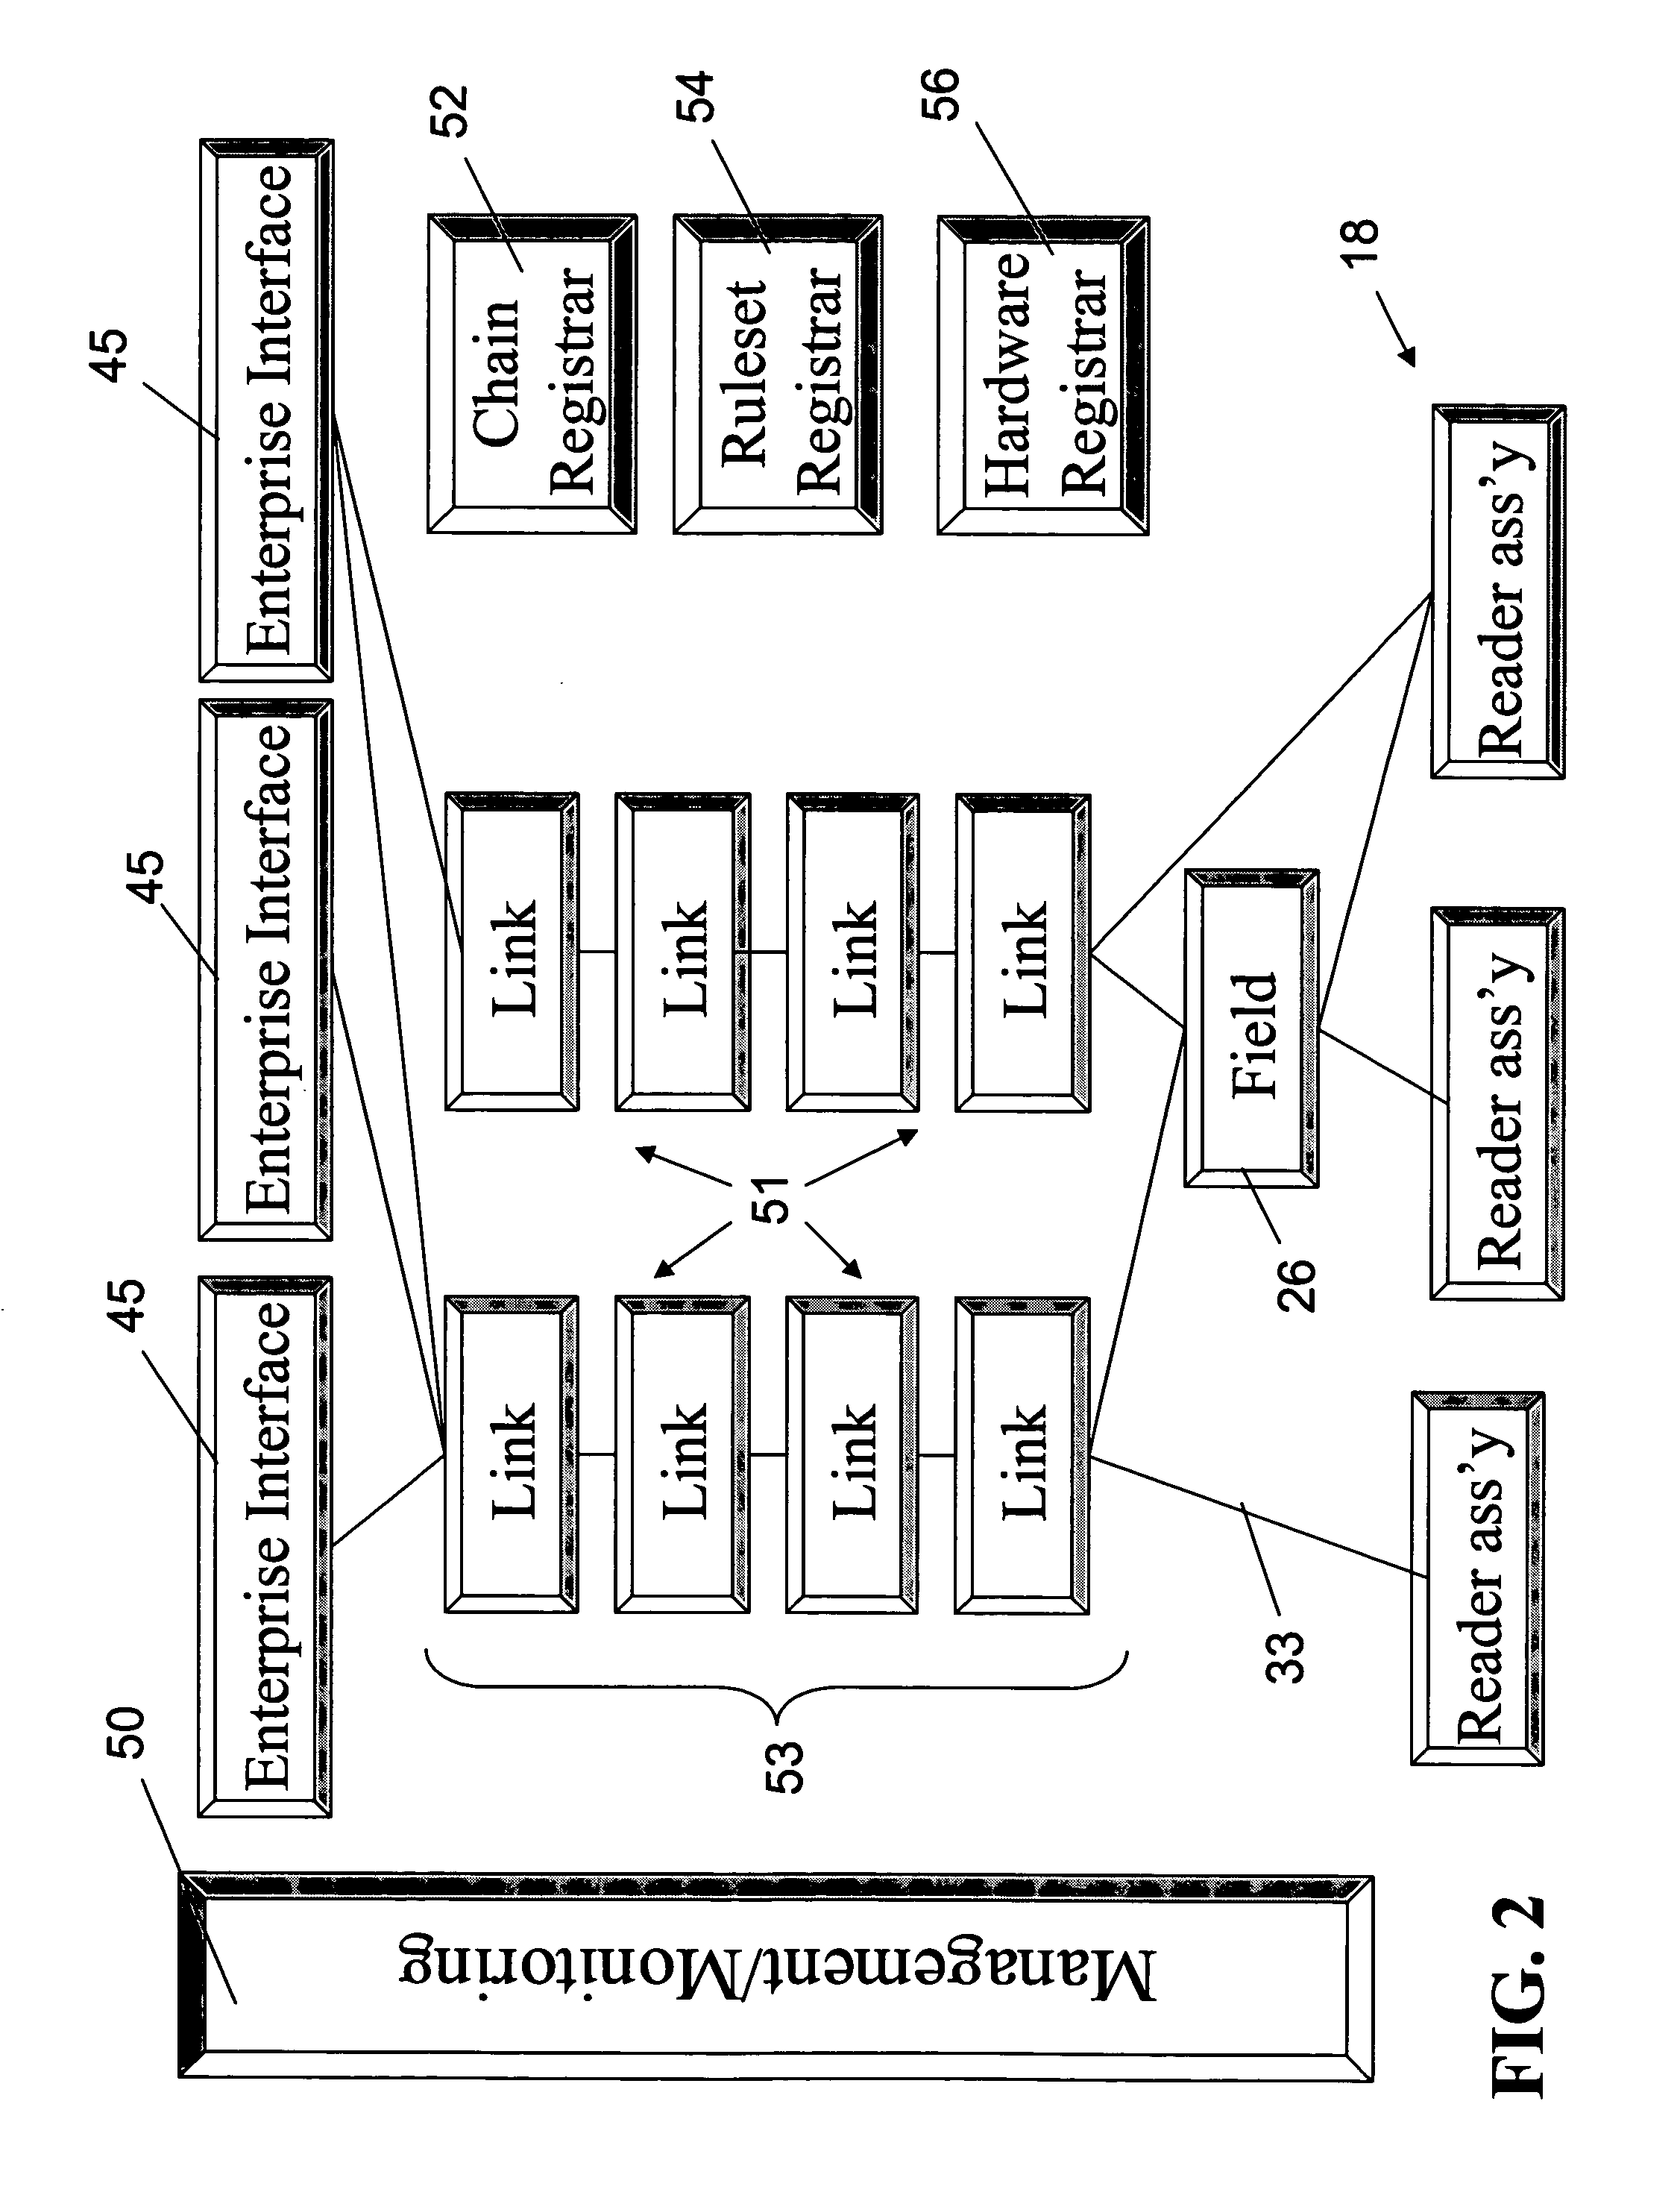 System and method for RFID system integration